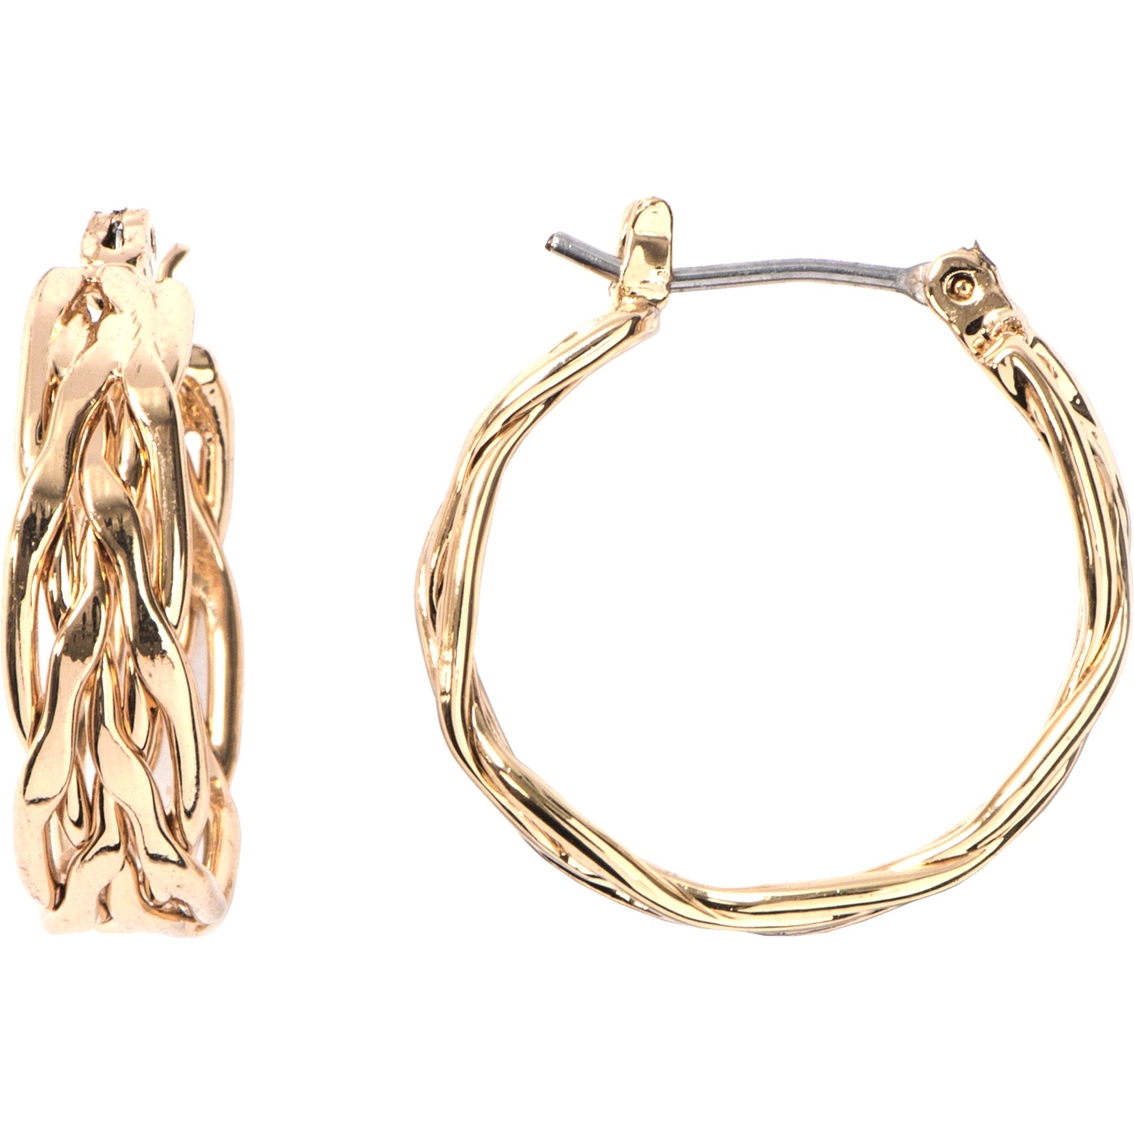 Napier Gold Tone Small Thick Hoop Earrings | Fashion Earrings | Jewelry ...